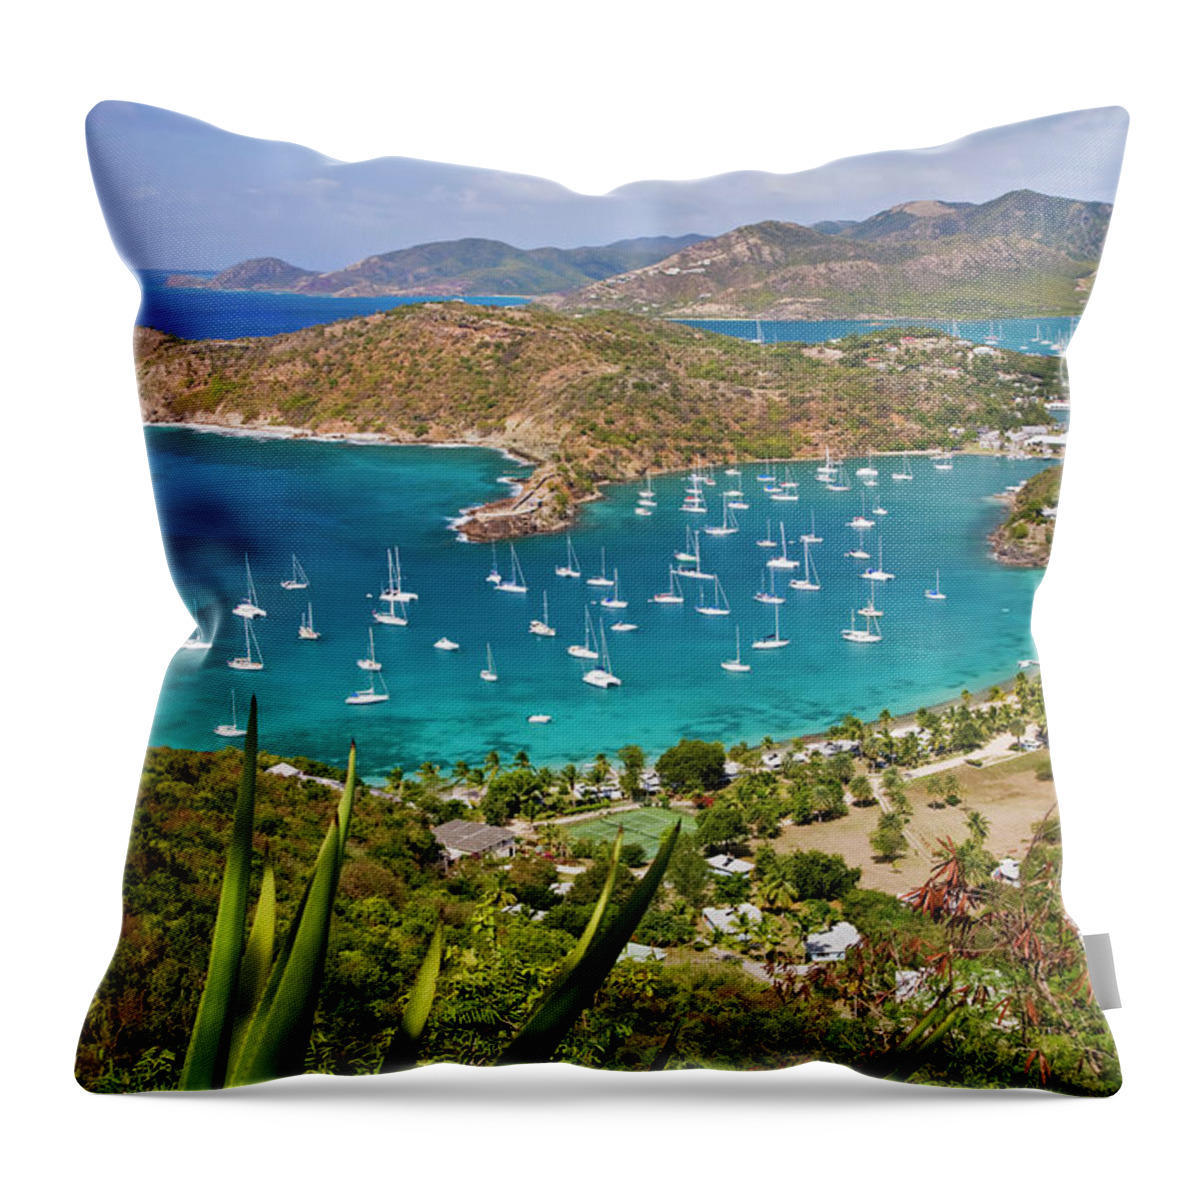 Water's Edge Throw Pillow featuring the photograph English Harbour, Antigua by Cworthy